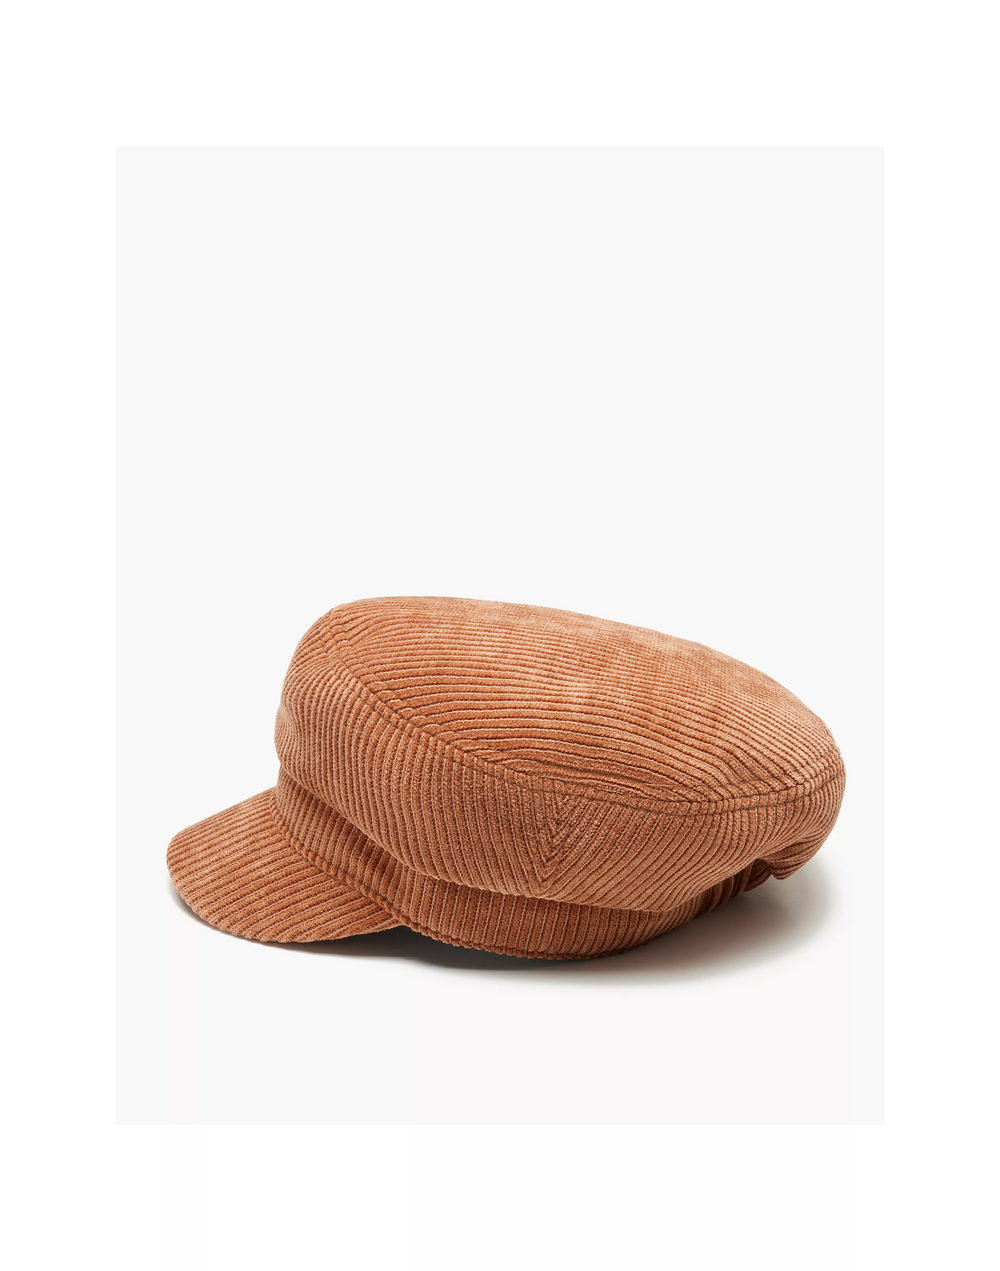 CLEO HAT - Kingfisher Road - Online Boutique